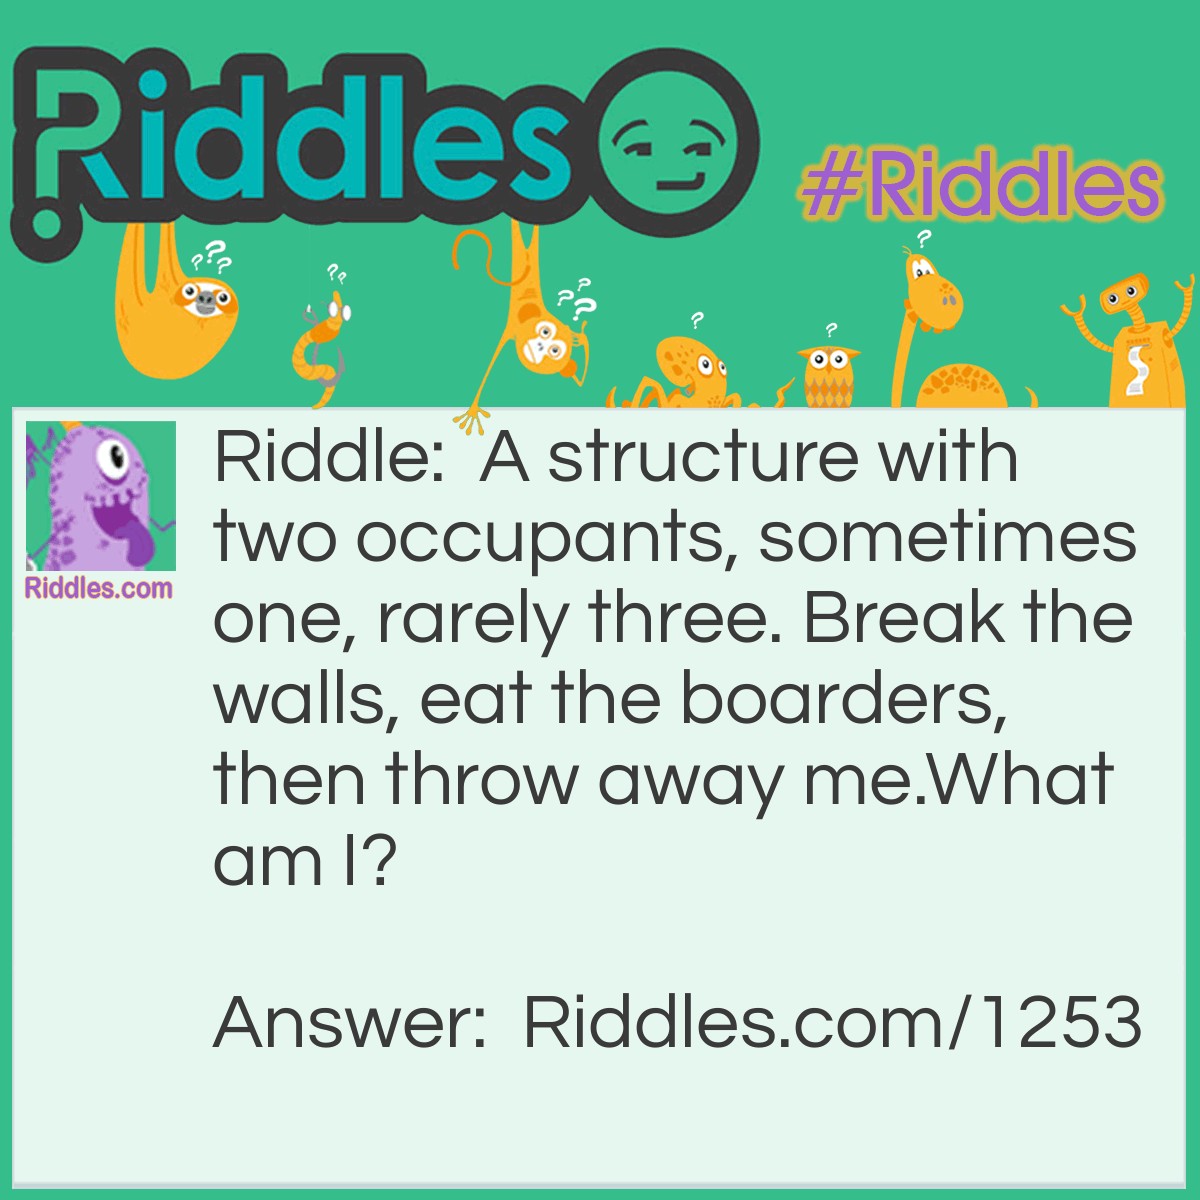 Riddle: A structure with two occupants, sometimes one, rarely three. Break the walls, eat the boarders, then throw away me.
What am I? Answer: A peanut